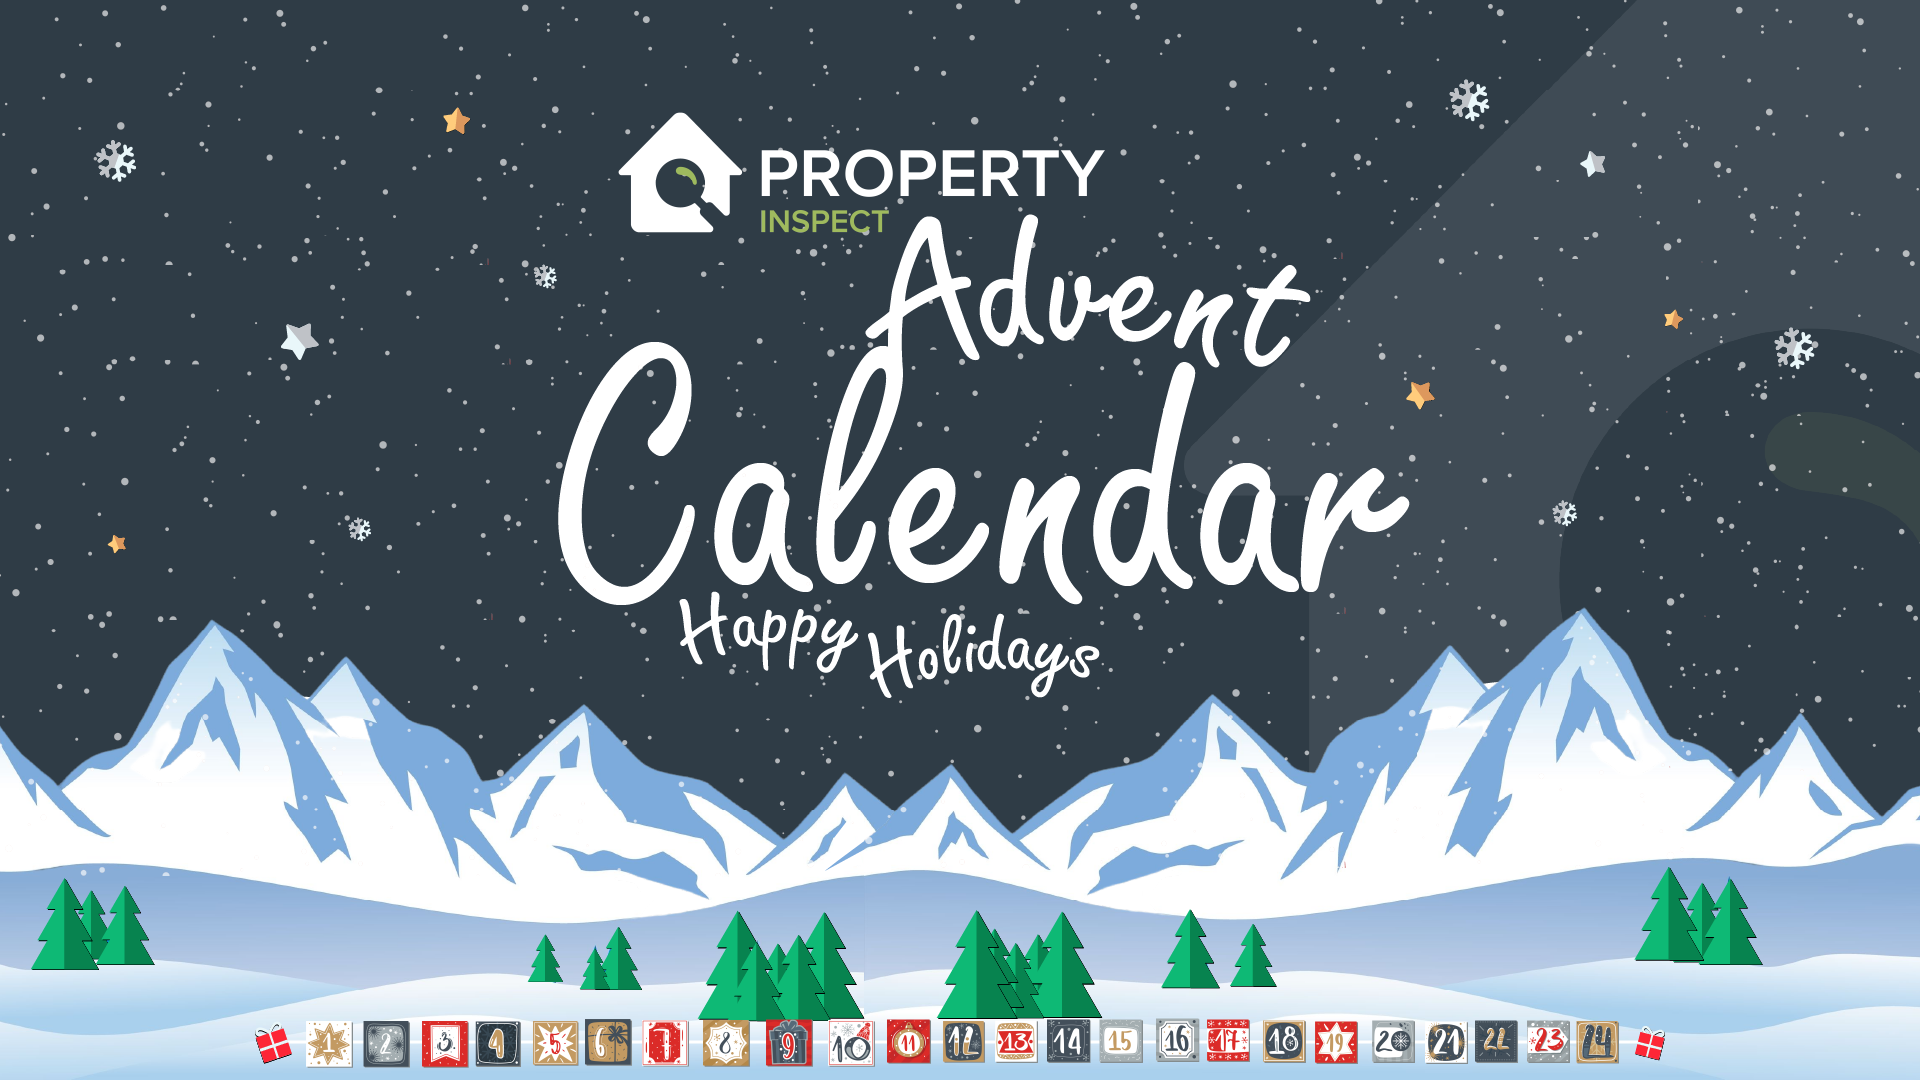 Property Inspect Advent Calendar 2022 – Your Definitive Guide to New Features, Tools & Updates